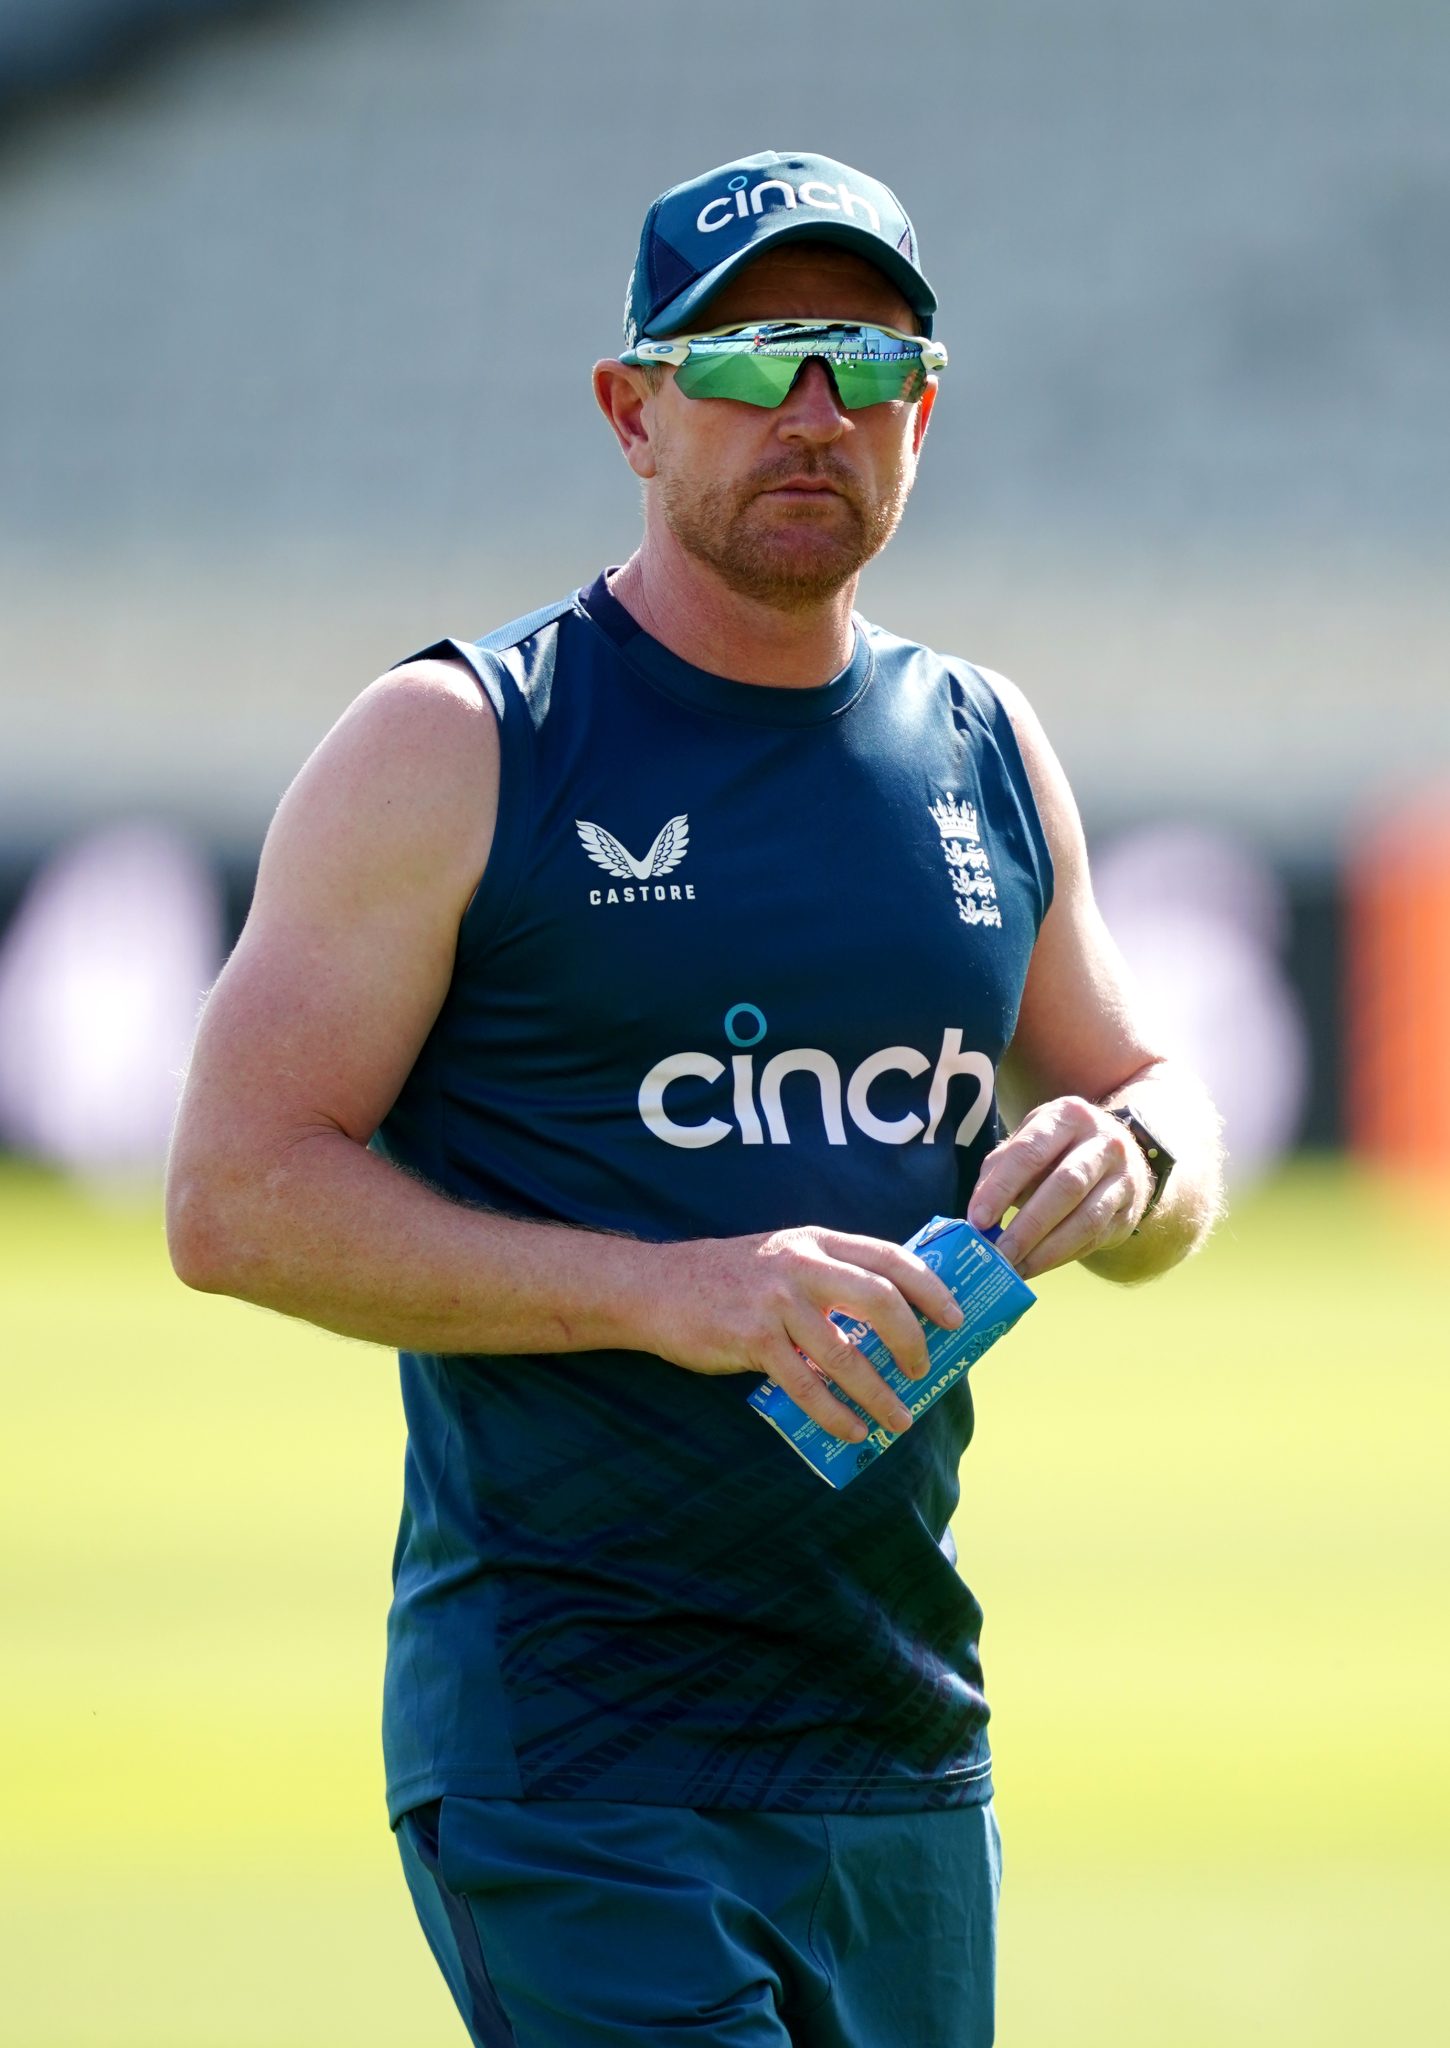 Paul Collingwood says thrilling Ashes series is drawing new fans to cricket